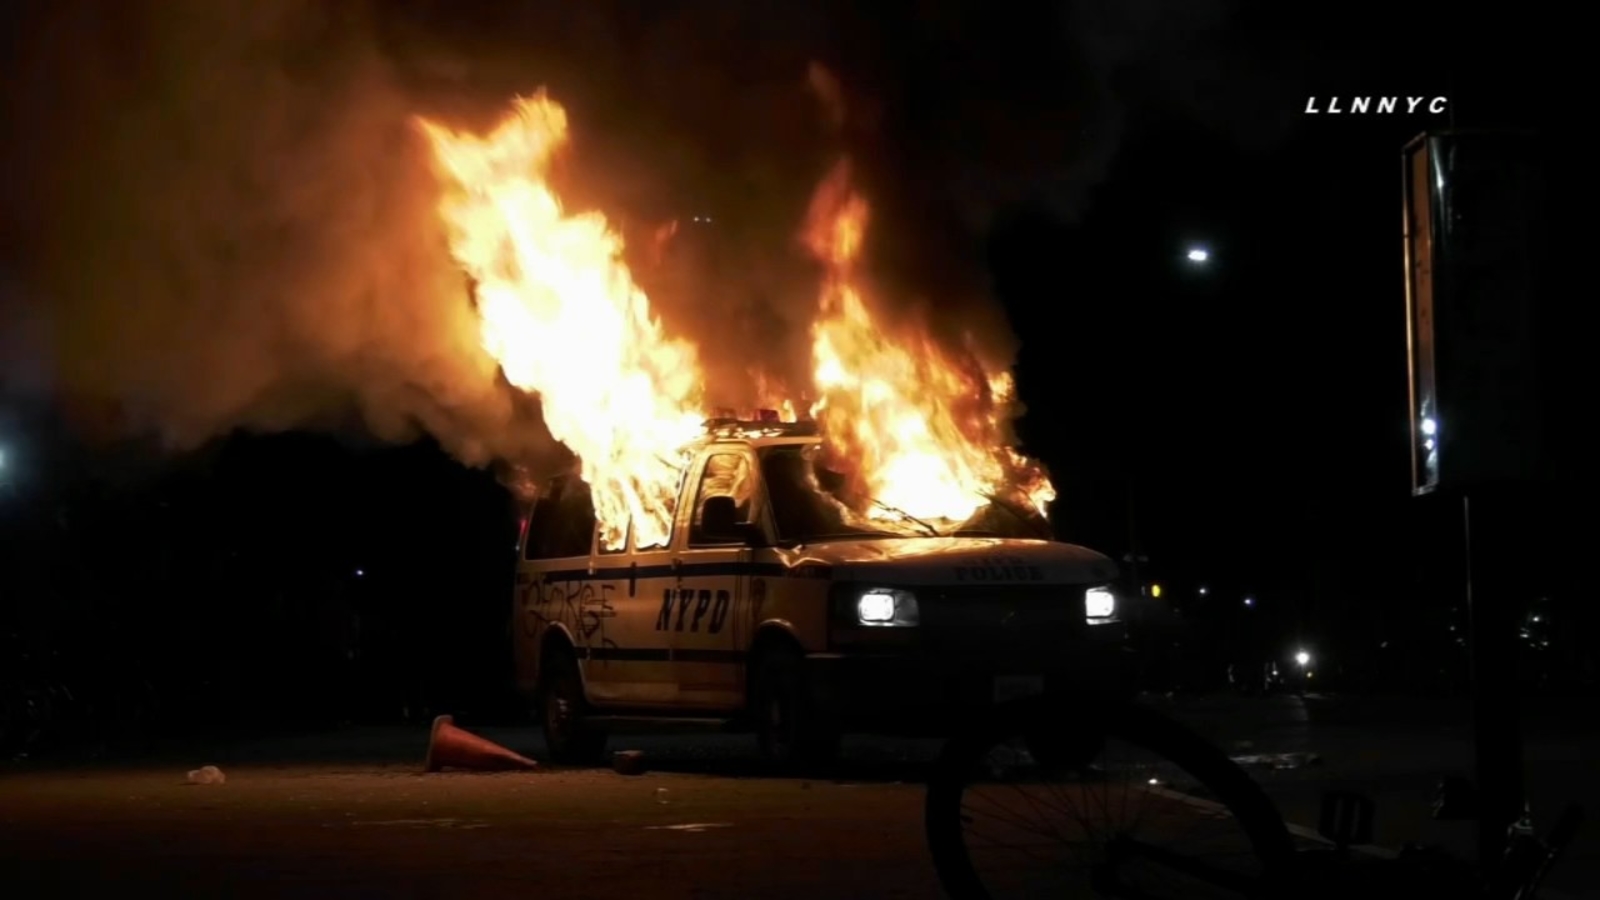 Attorney sentenced to 1 year and 1 day in prison after firebombing NYPD vehicle